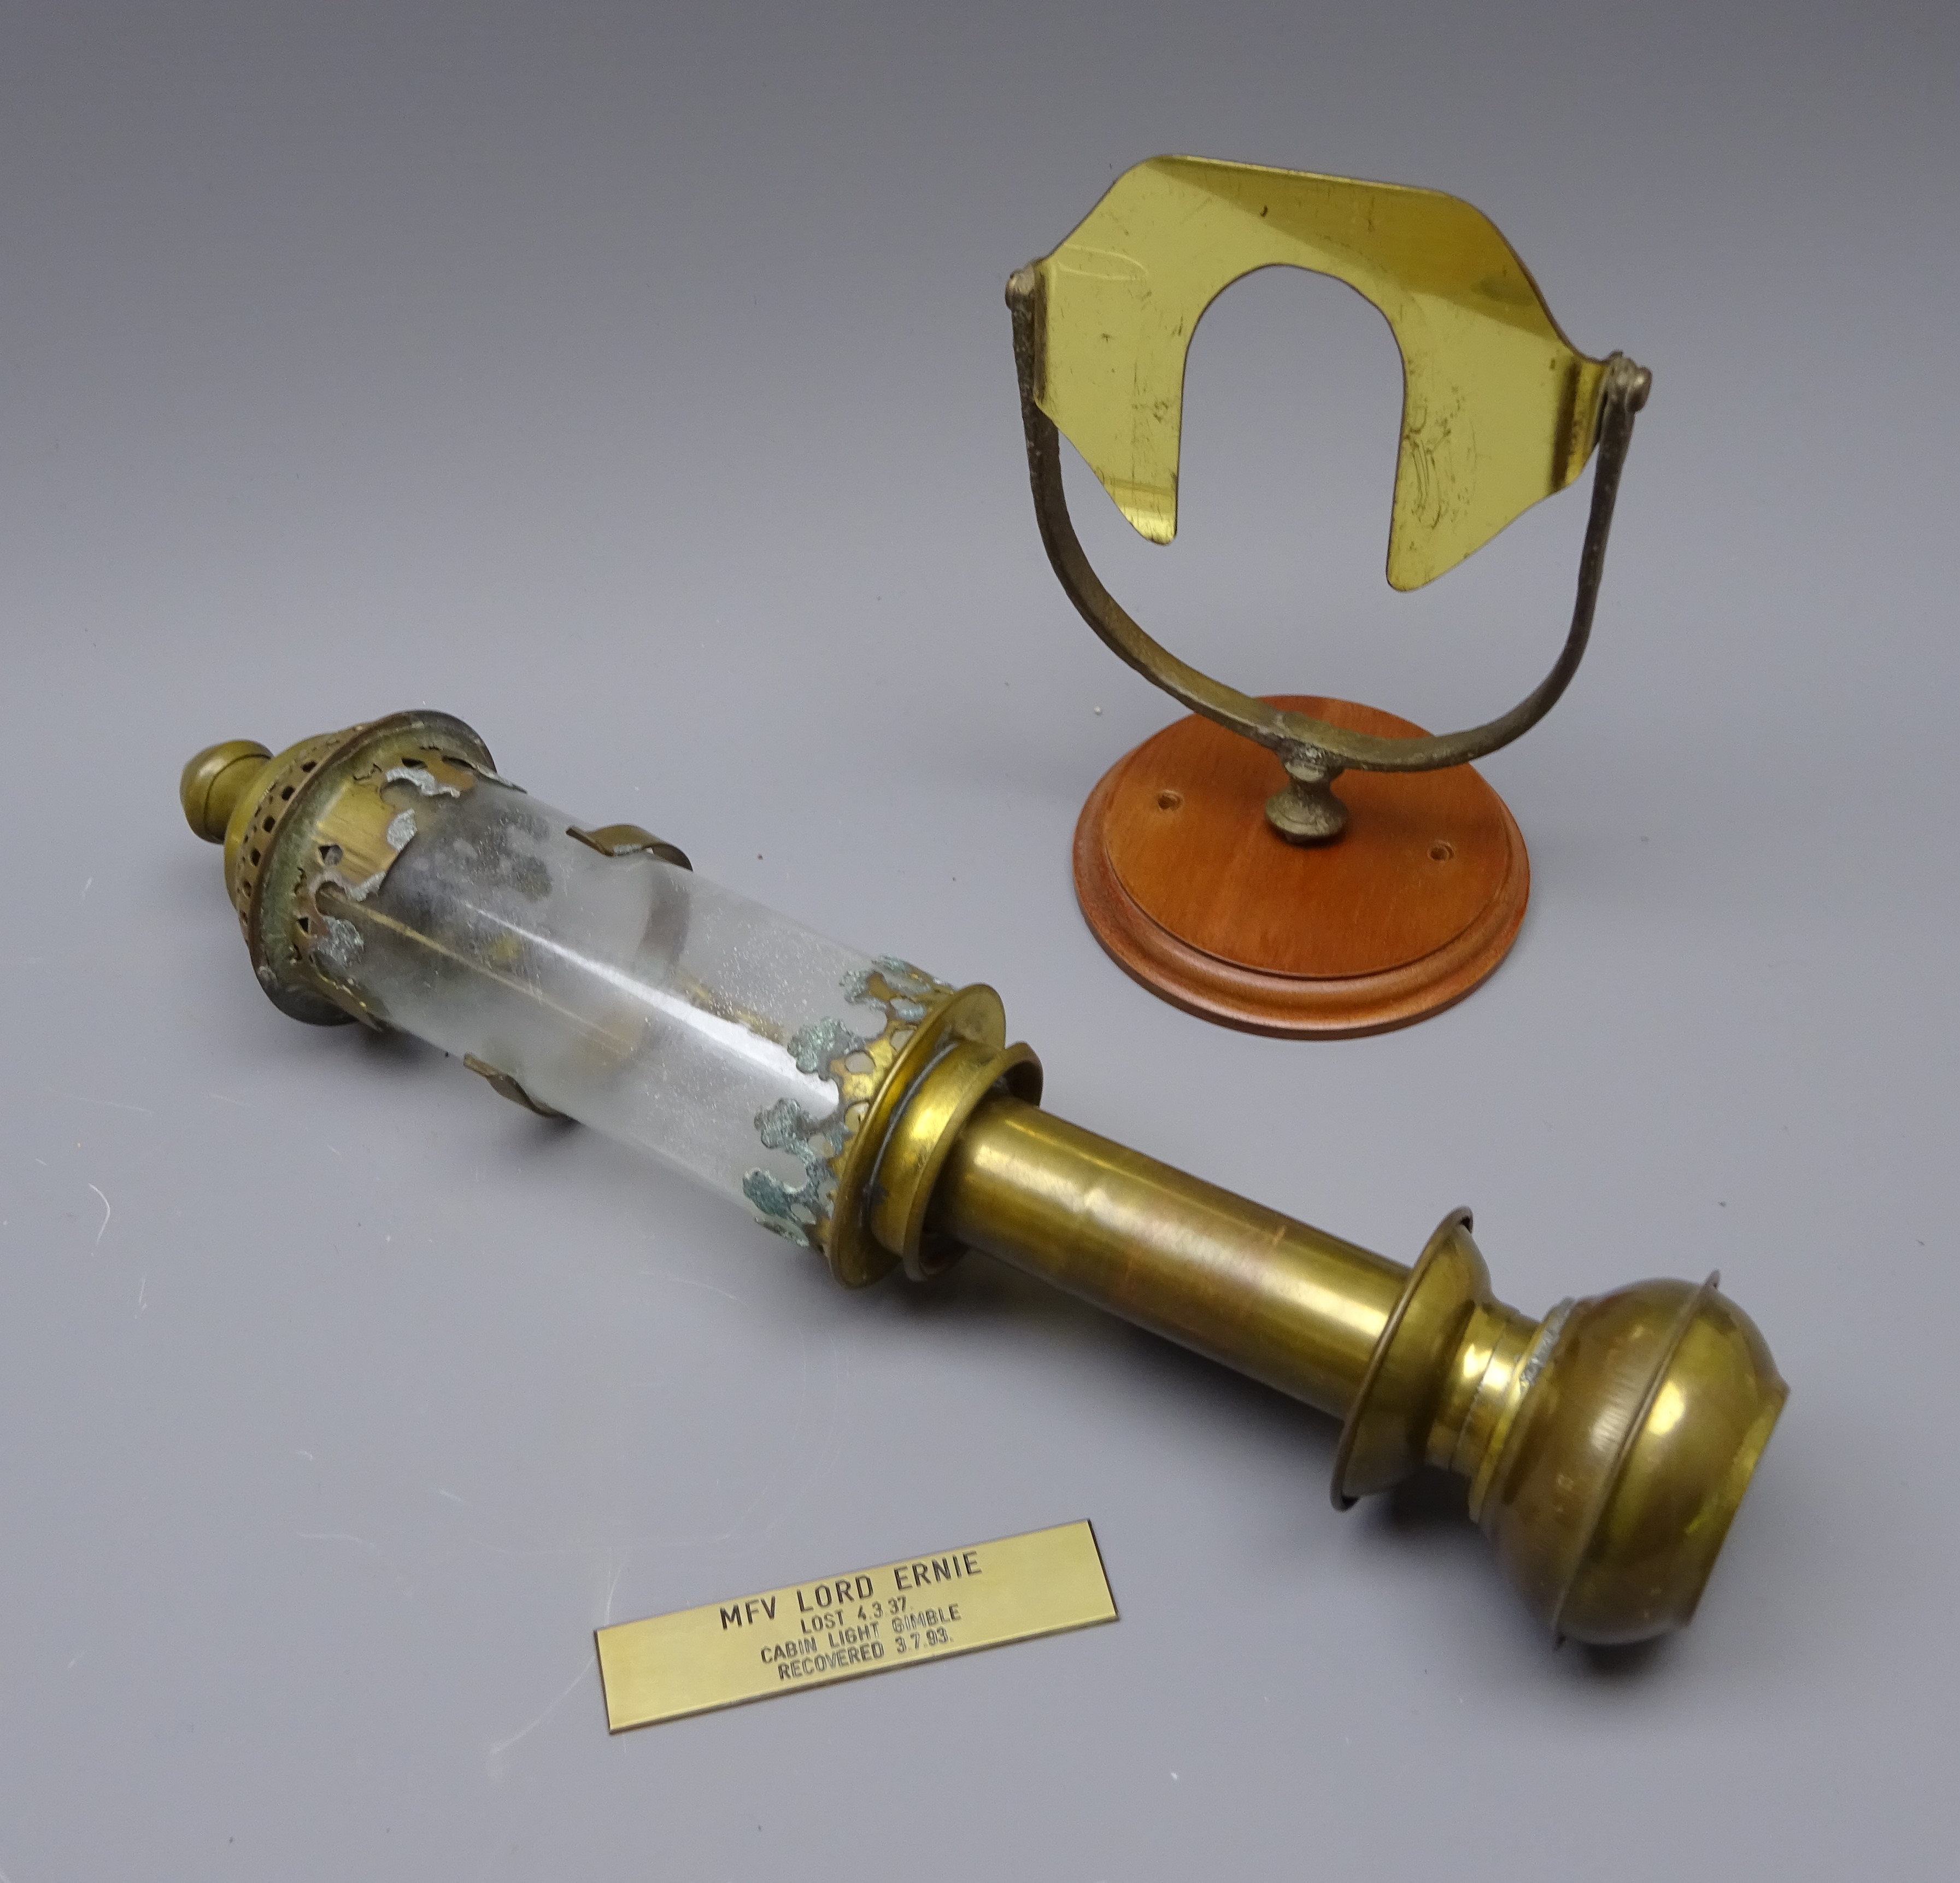 MFV Lord Ernle - A gimbal mounted candle lamp, with later glass shade, H35cm.